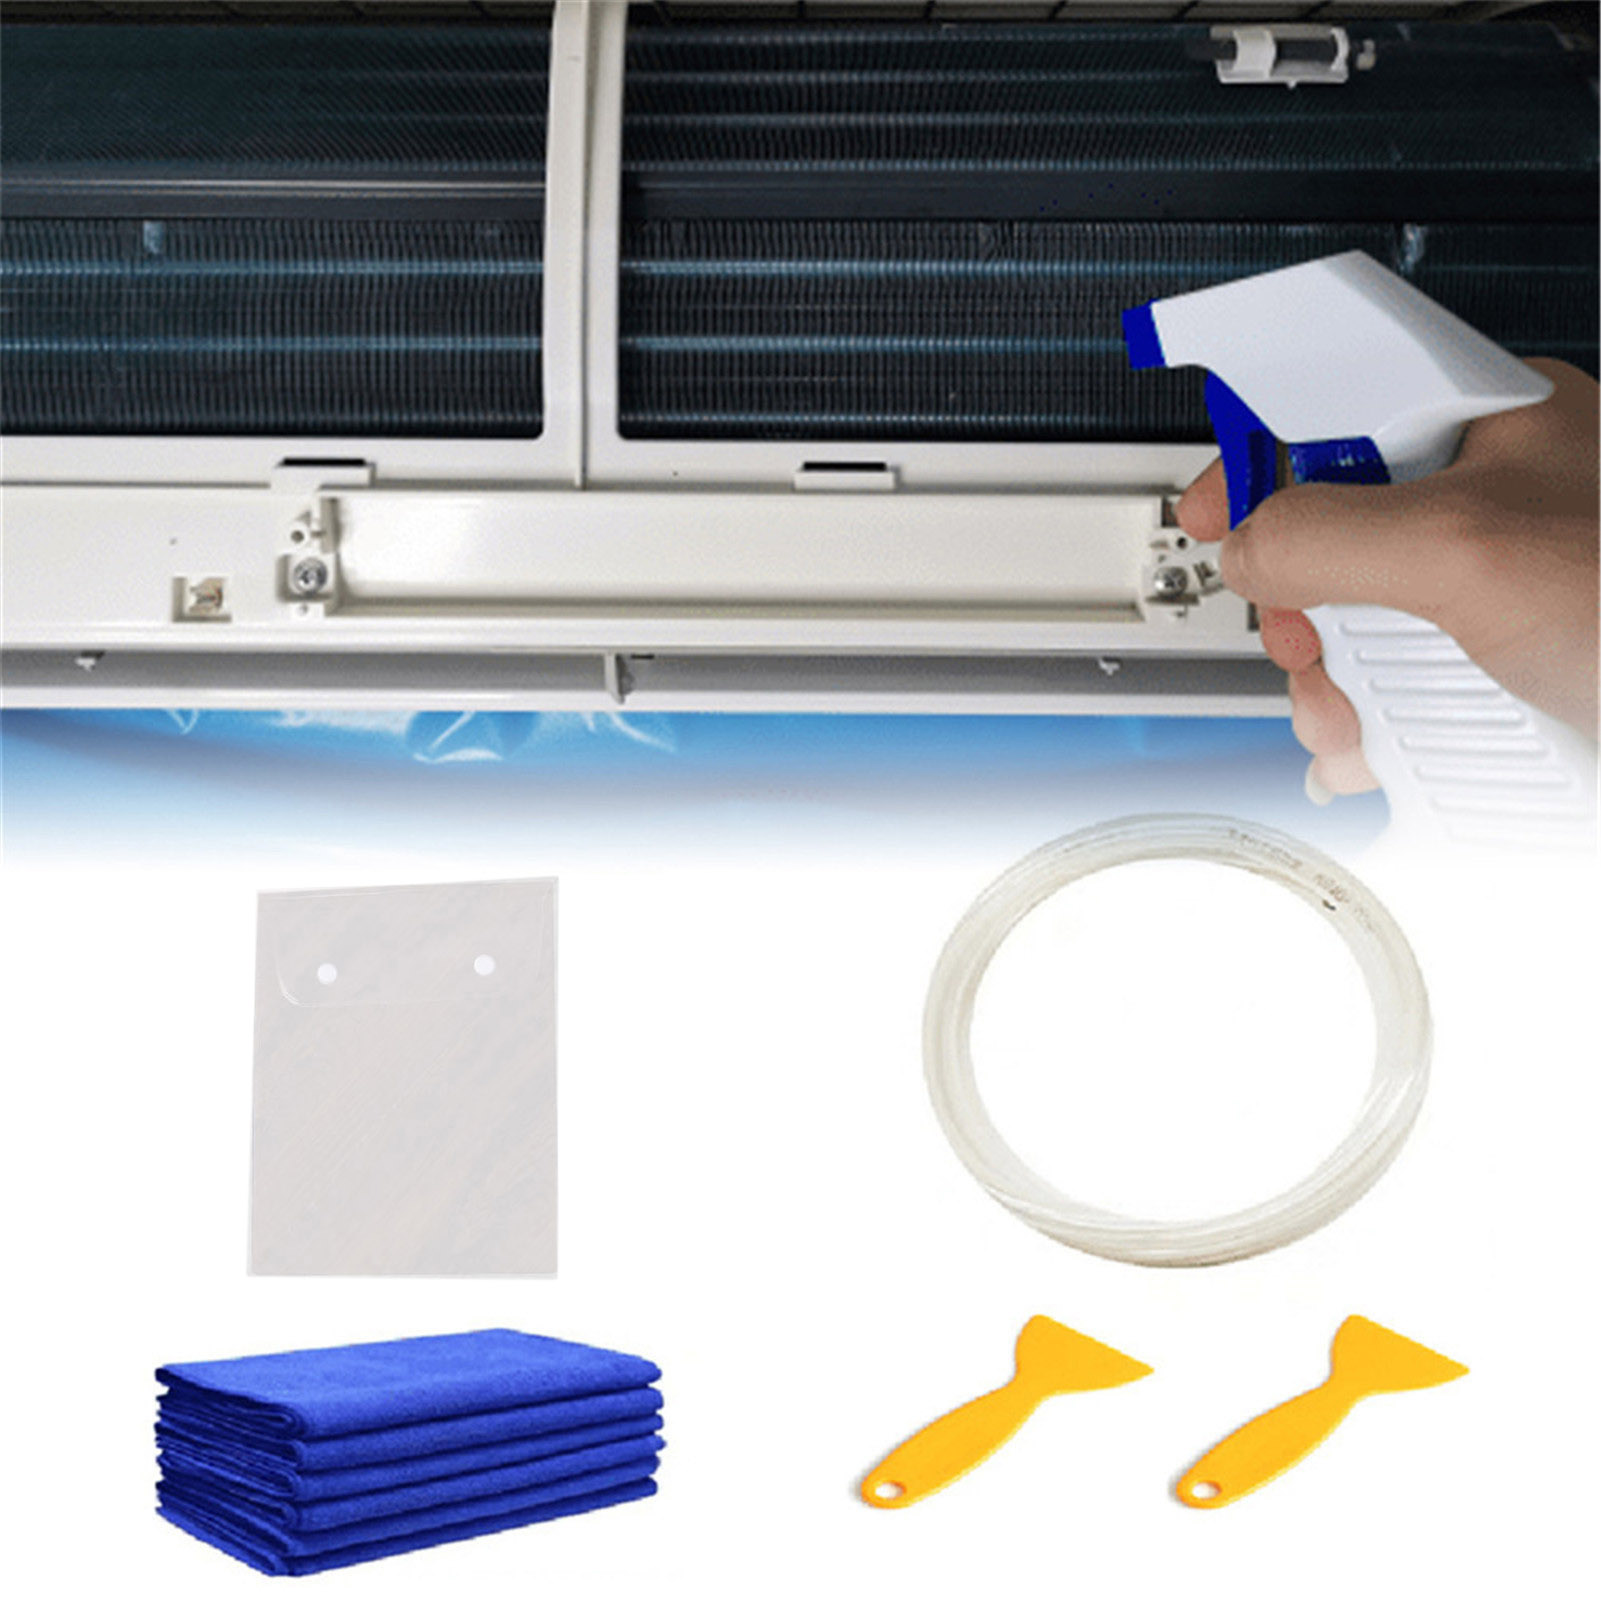 Air Conditioner Cleaning Cover with Water Pipe Waterproof Dust Protection Cleaning Cover Bag for Air Conditioners Below 1.5P